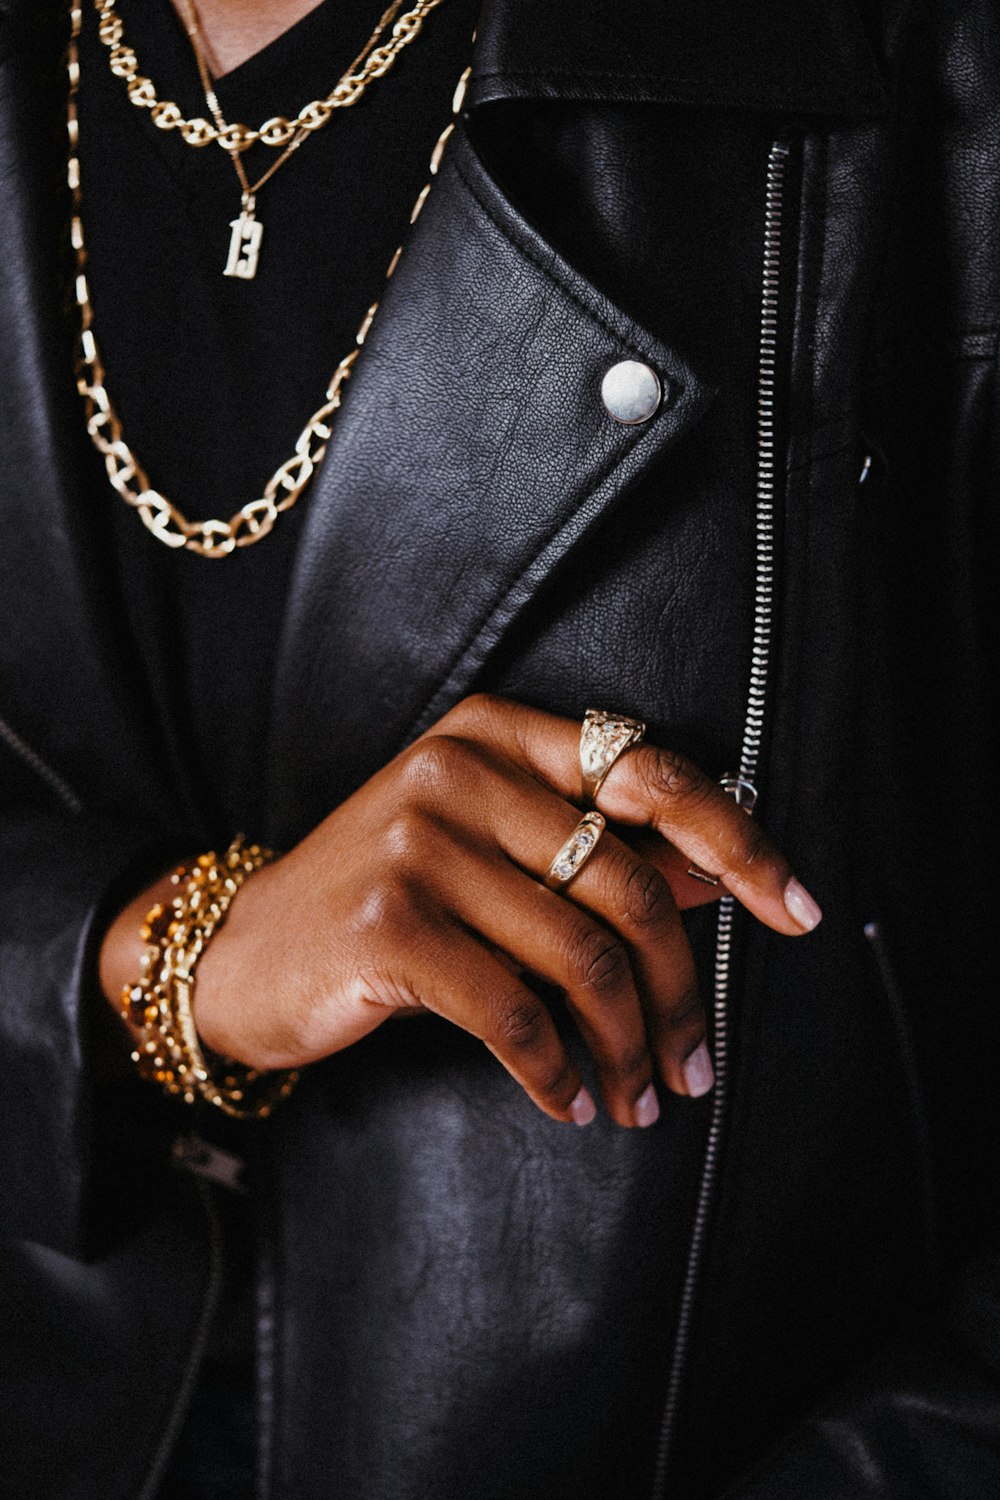 a person wearing a black jacket and gold jewelry